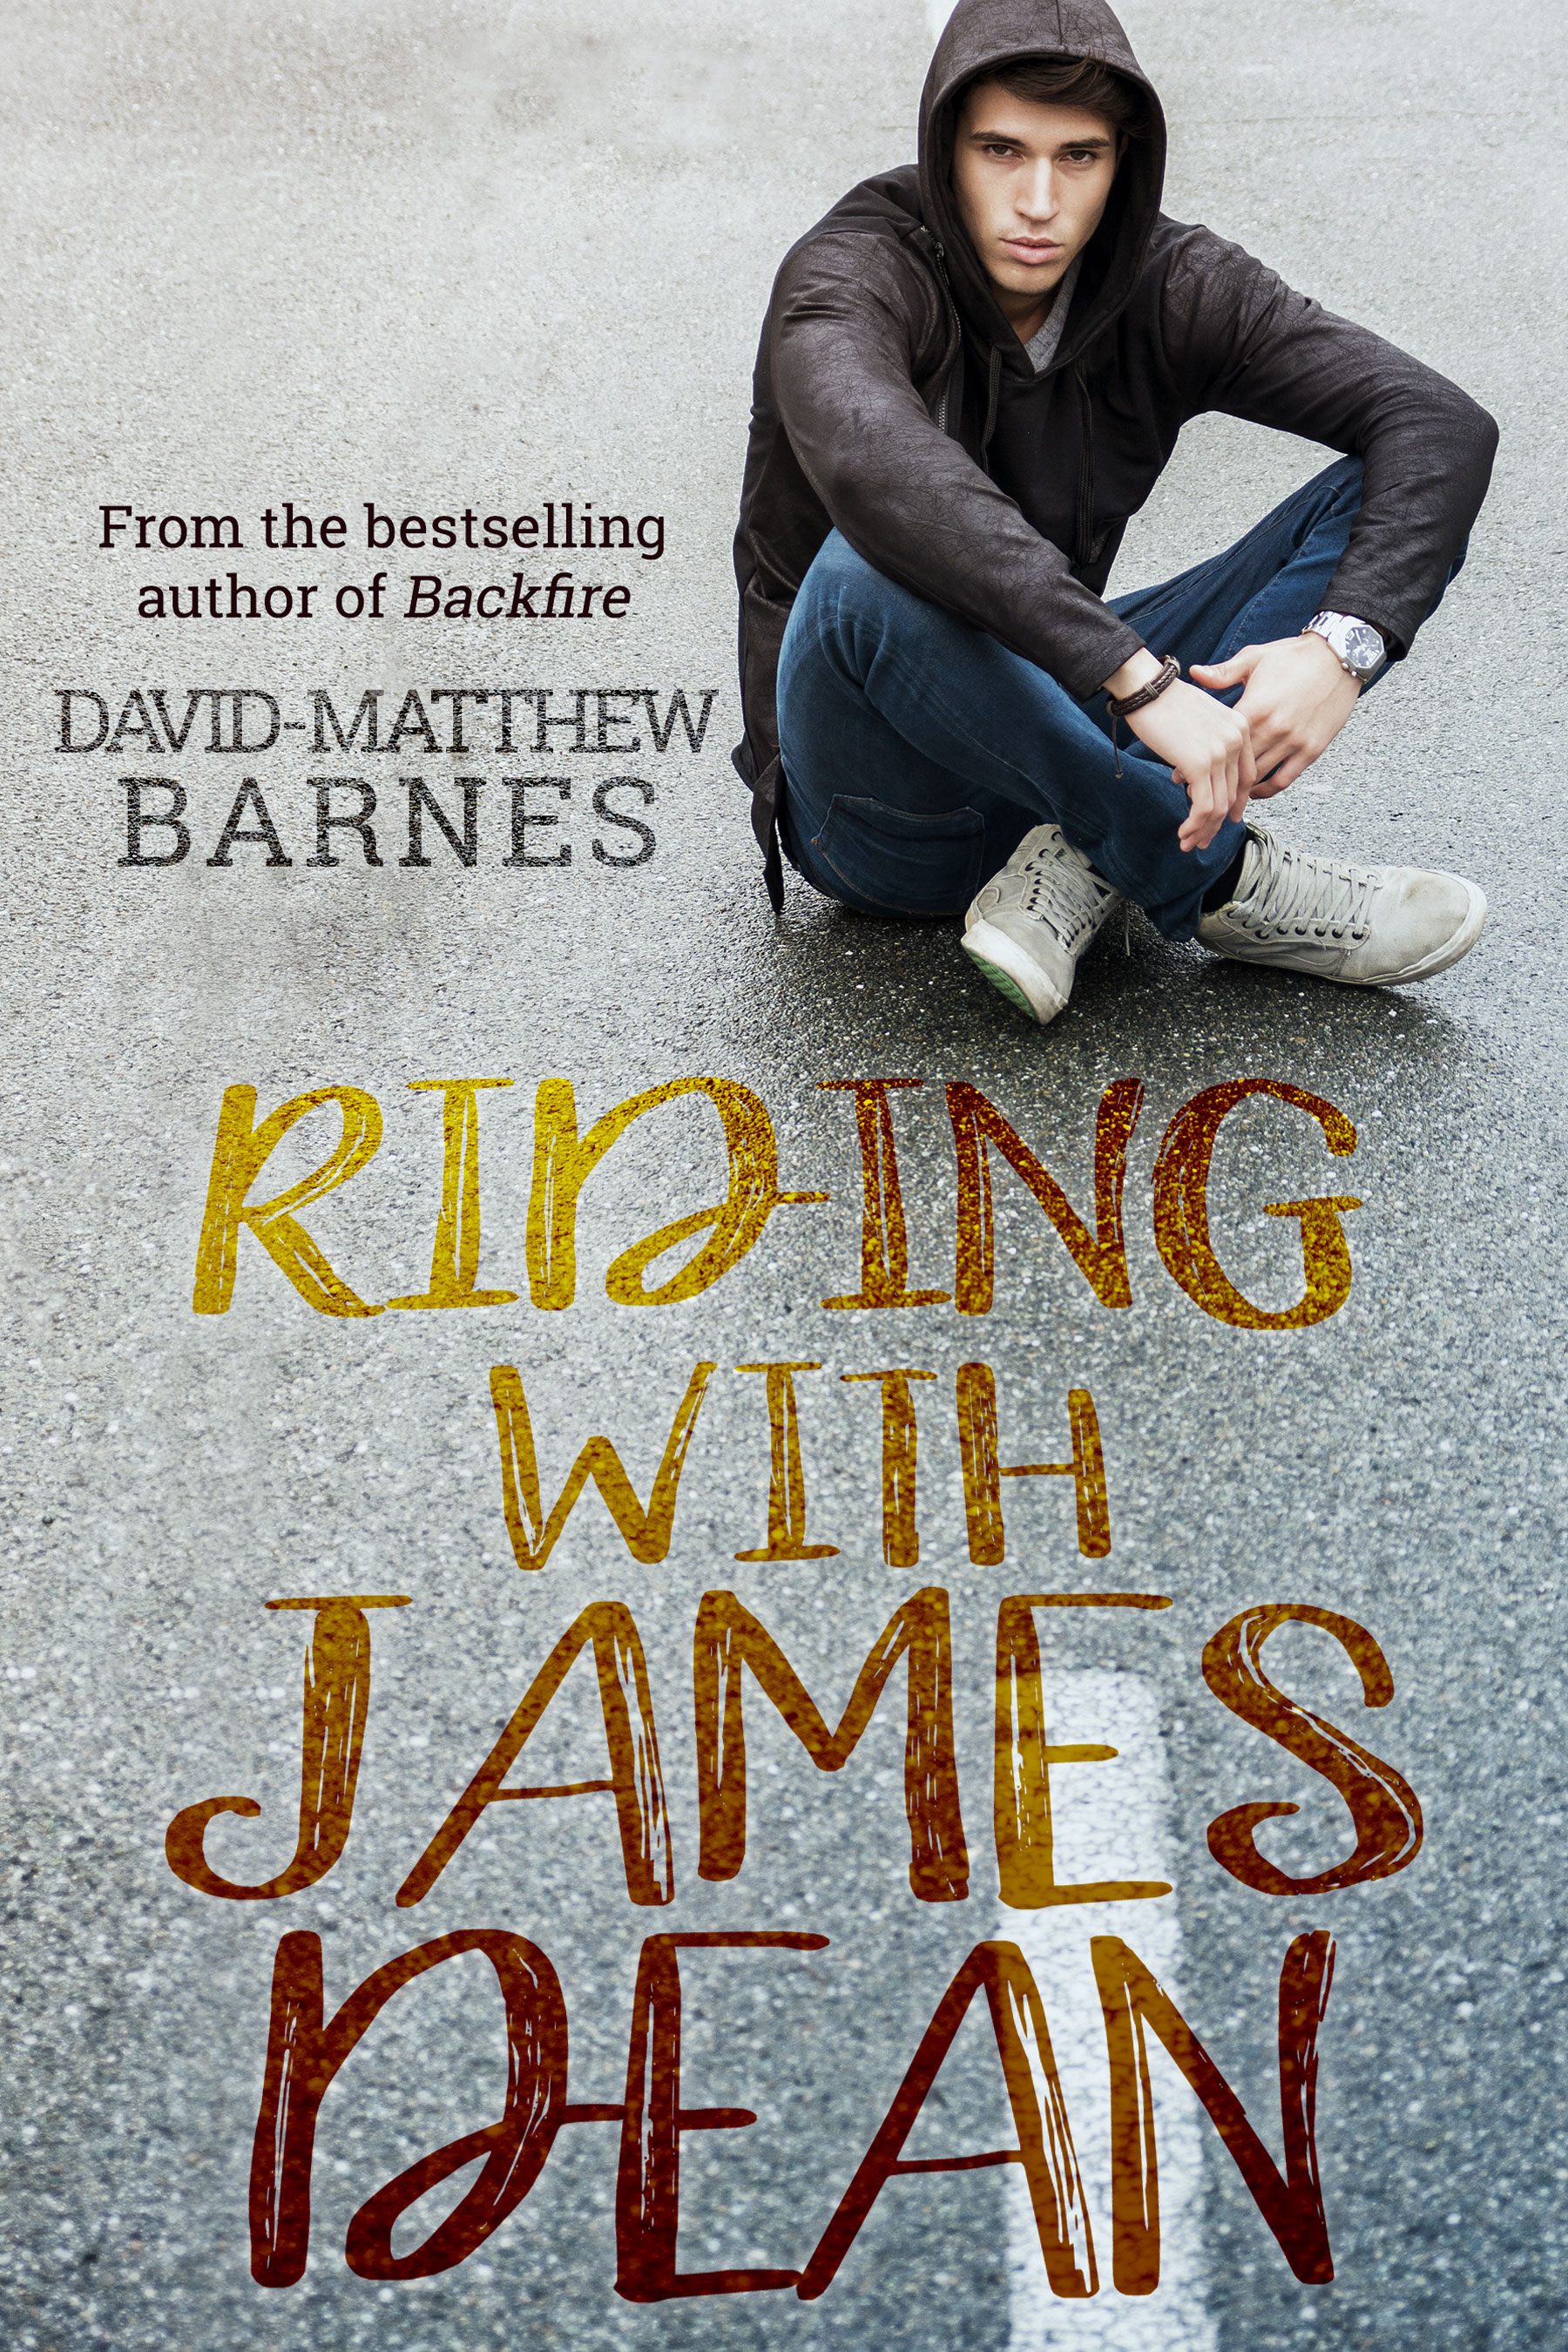 FREE: Riding with James Dean by David-Matthew Barnes